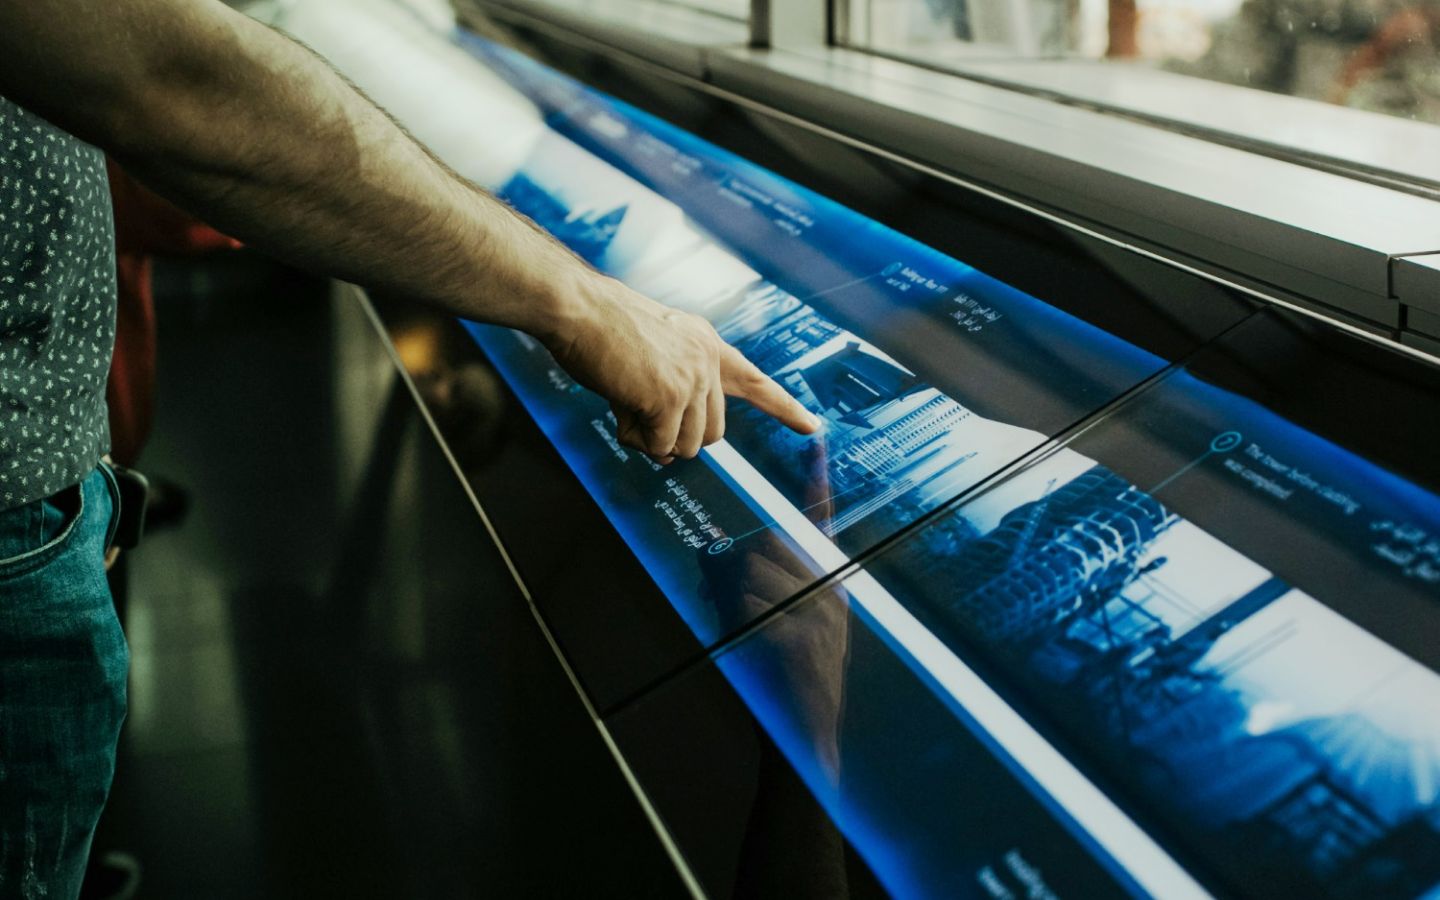 Image of person interacting with a touchscreen